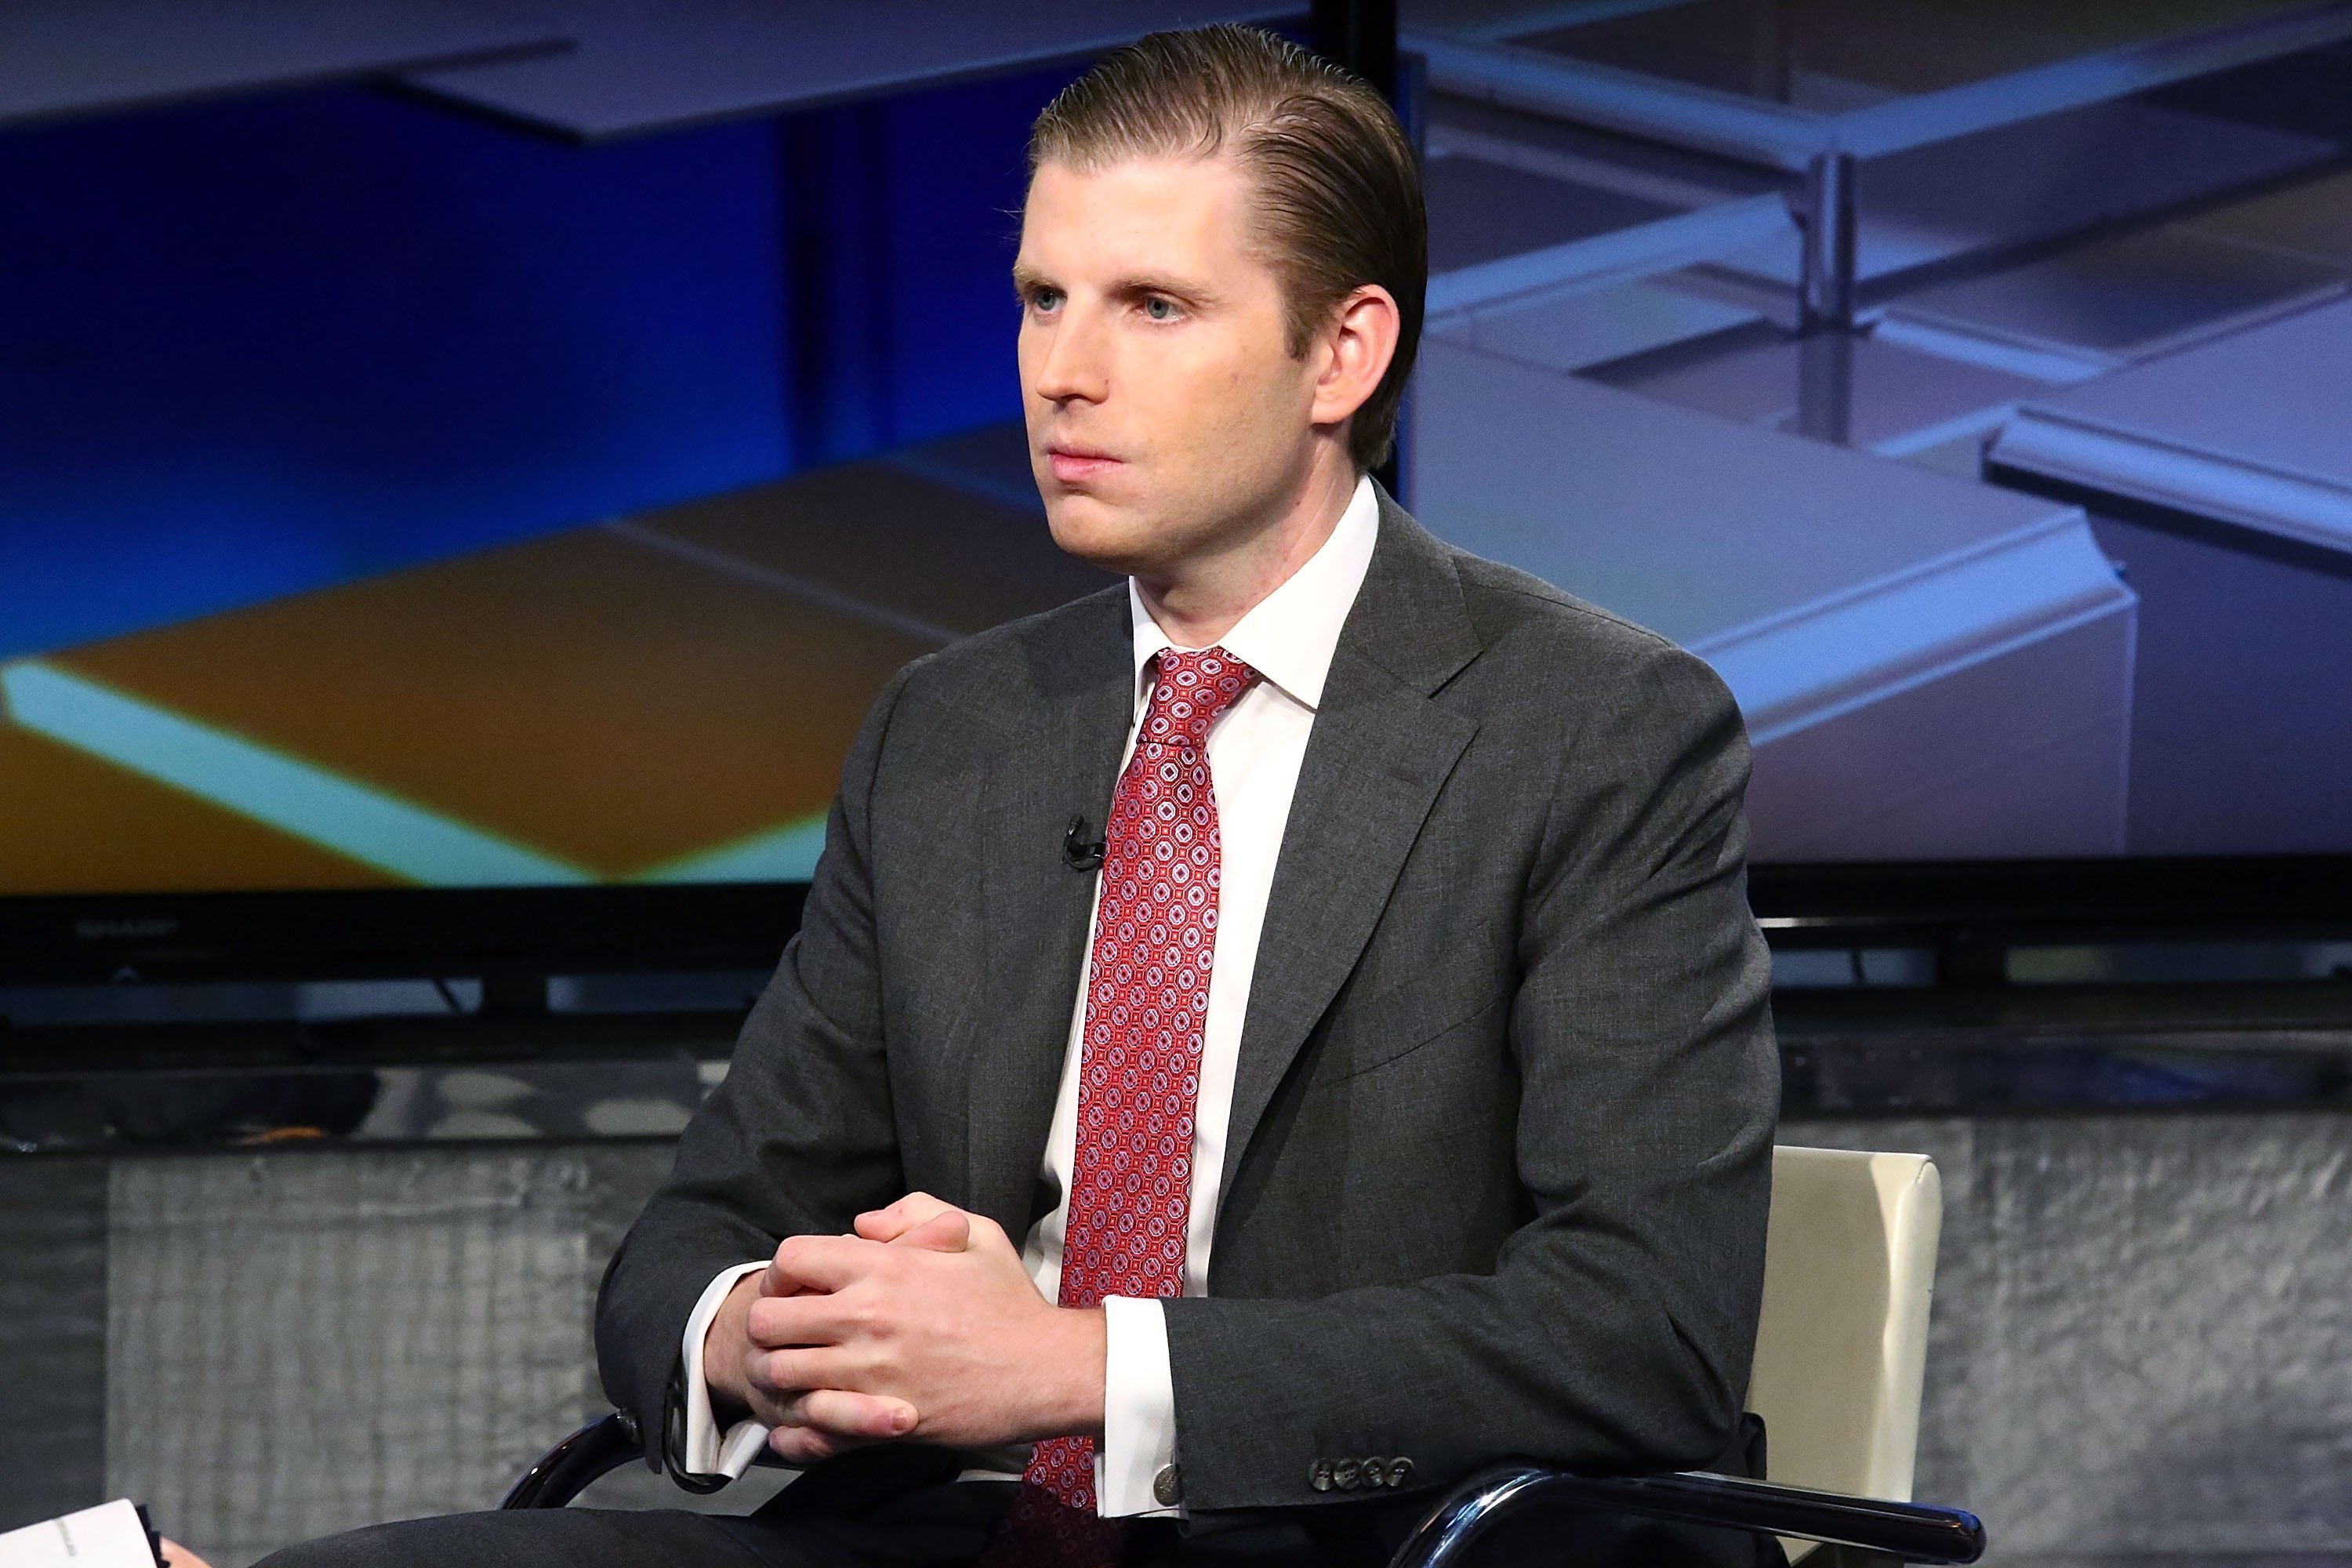 Eric Trump at FOX Business Network's Maria Bartiromo at FOX Studios on October 4, 2016 in New York City | Photo: Getty Images